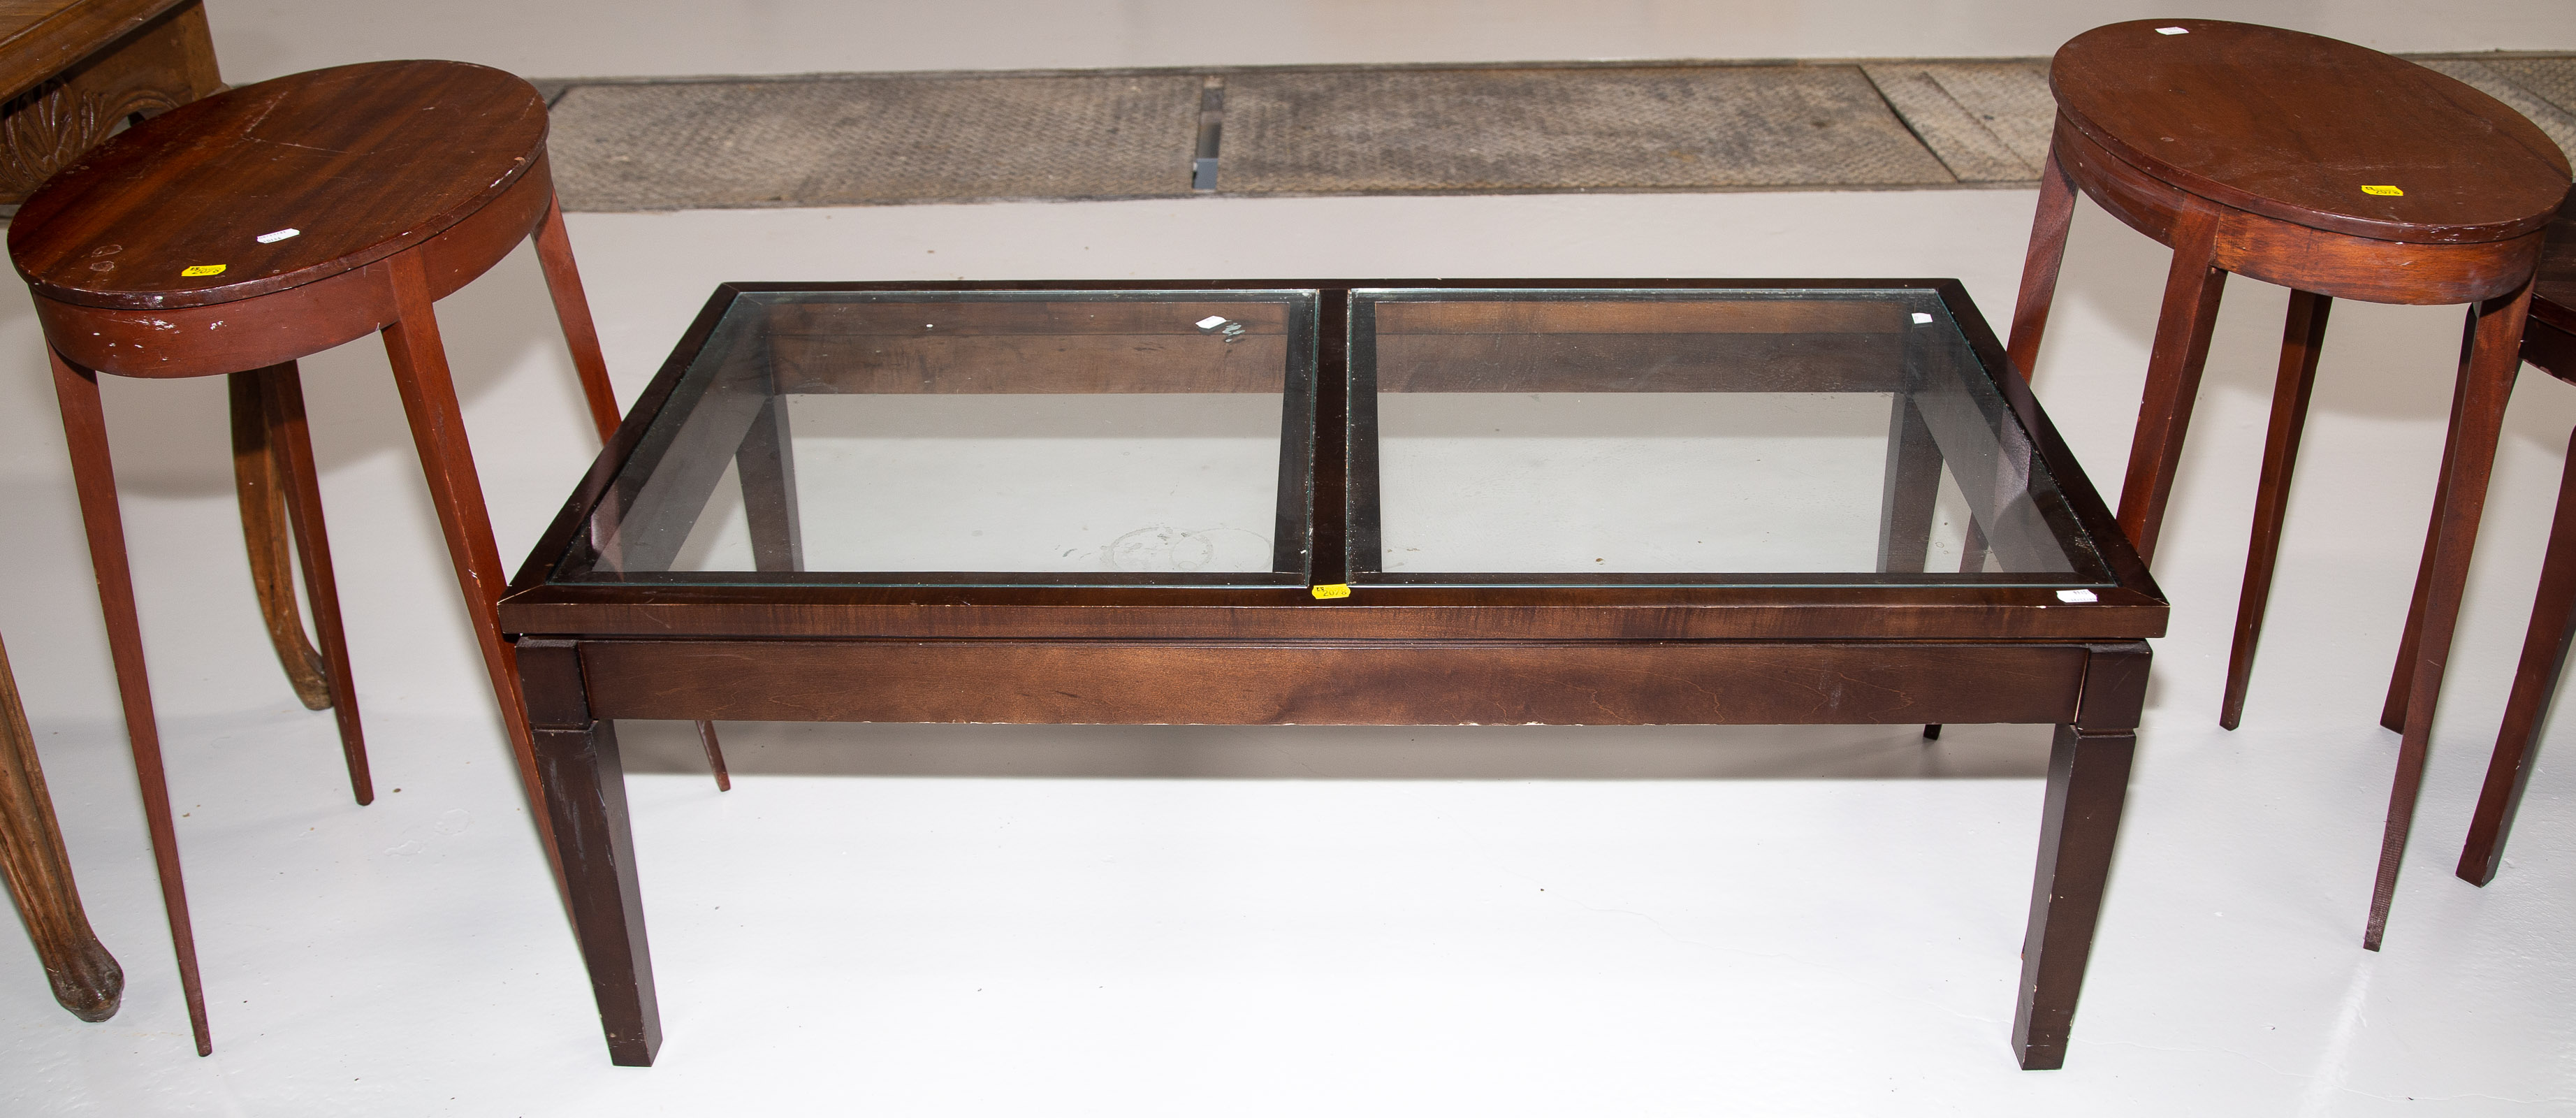 COFFEE TABLE WITH GLASS INSERTS